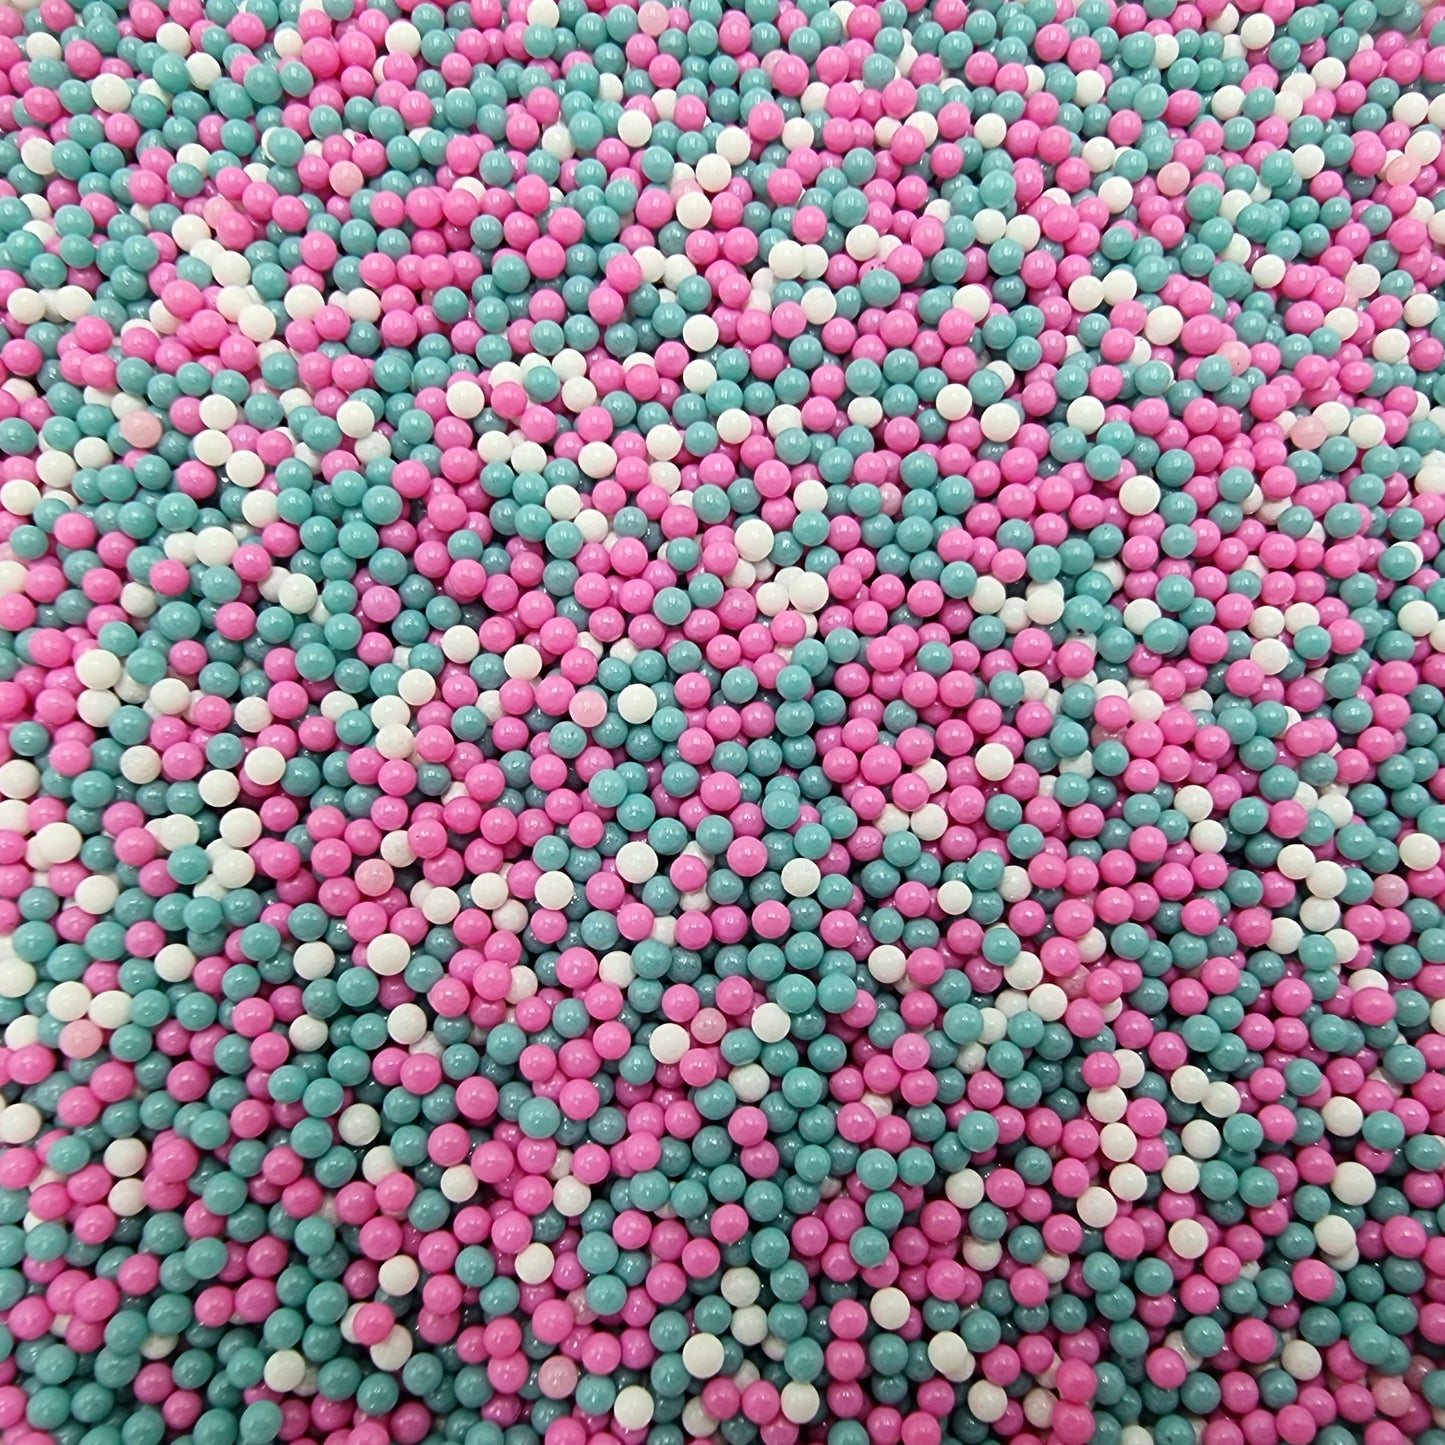 Polymer Clay Balls - Pink/Teal/White